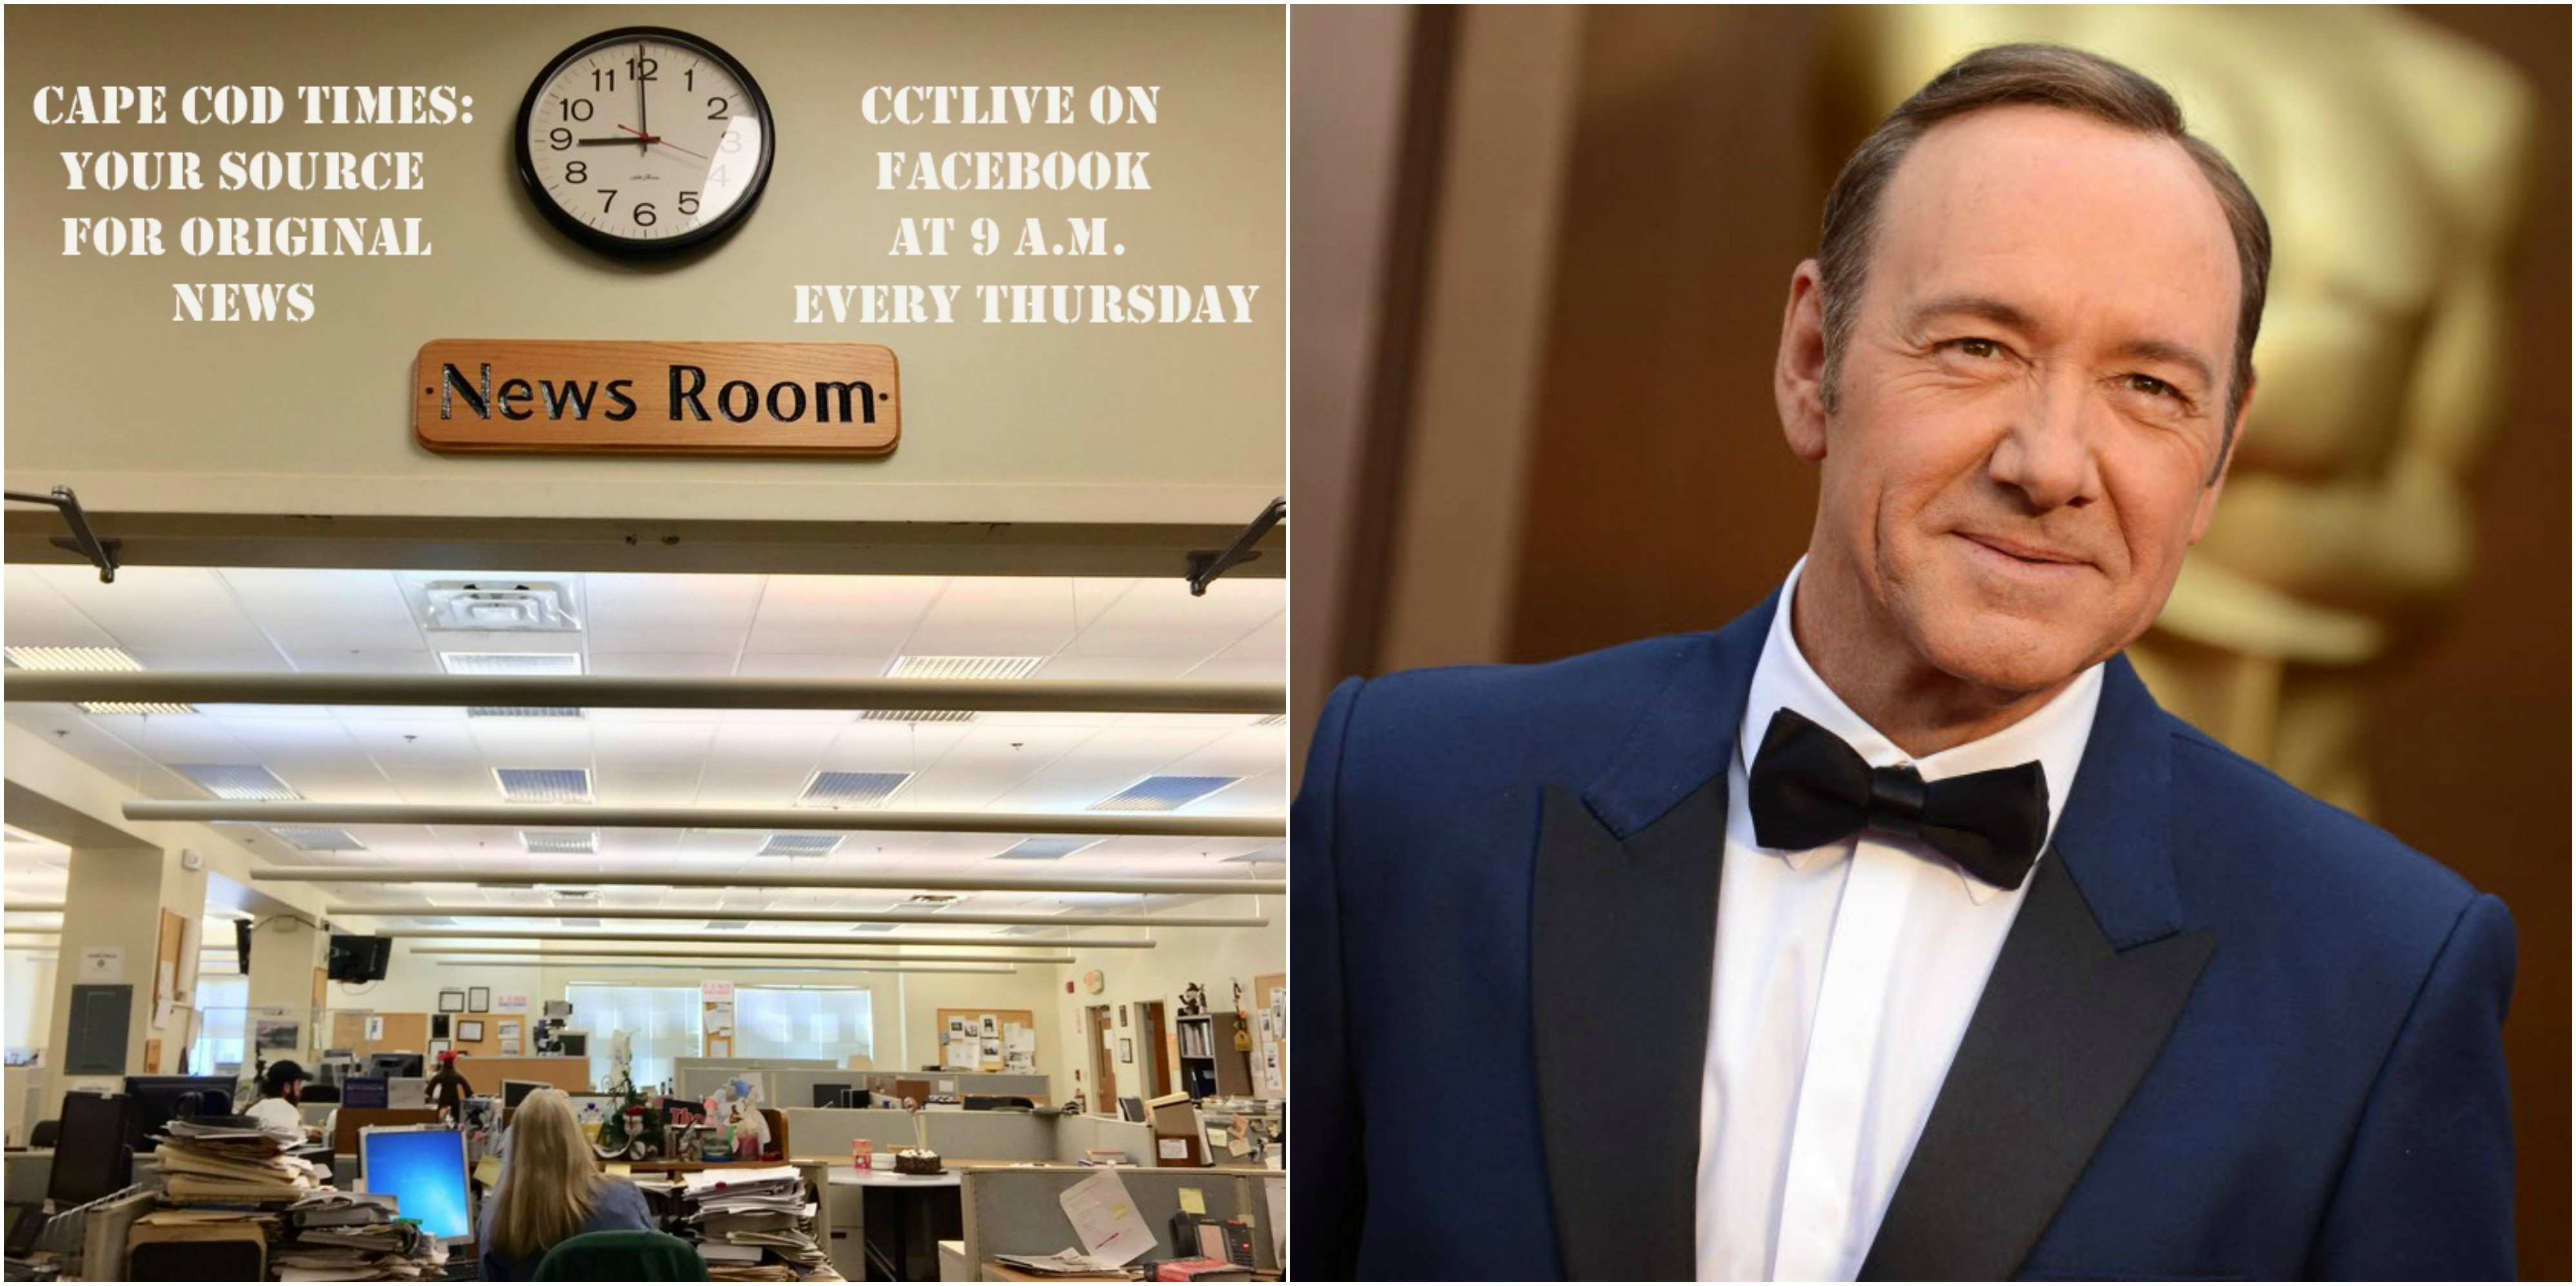 CCTLive: Charges against actor Kevin Spacey, a visit to Cape Cod Synagogue and more